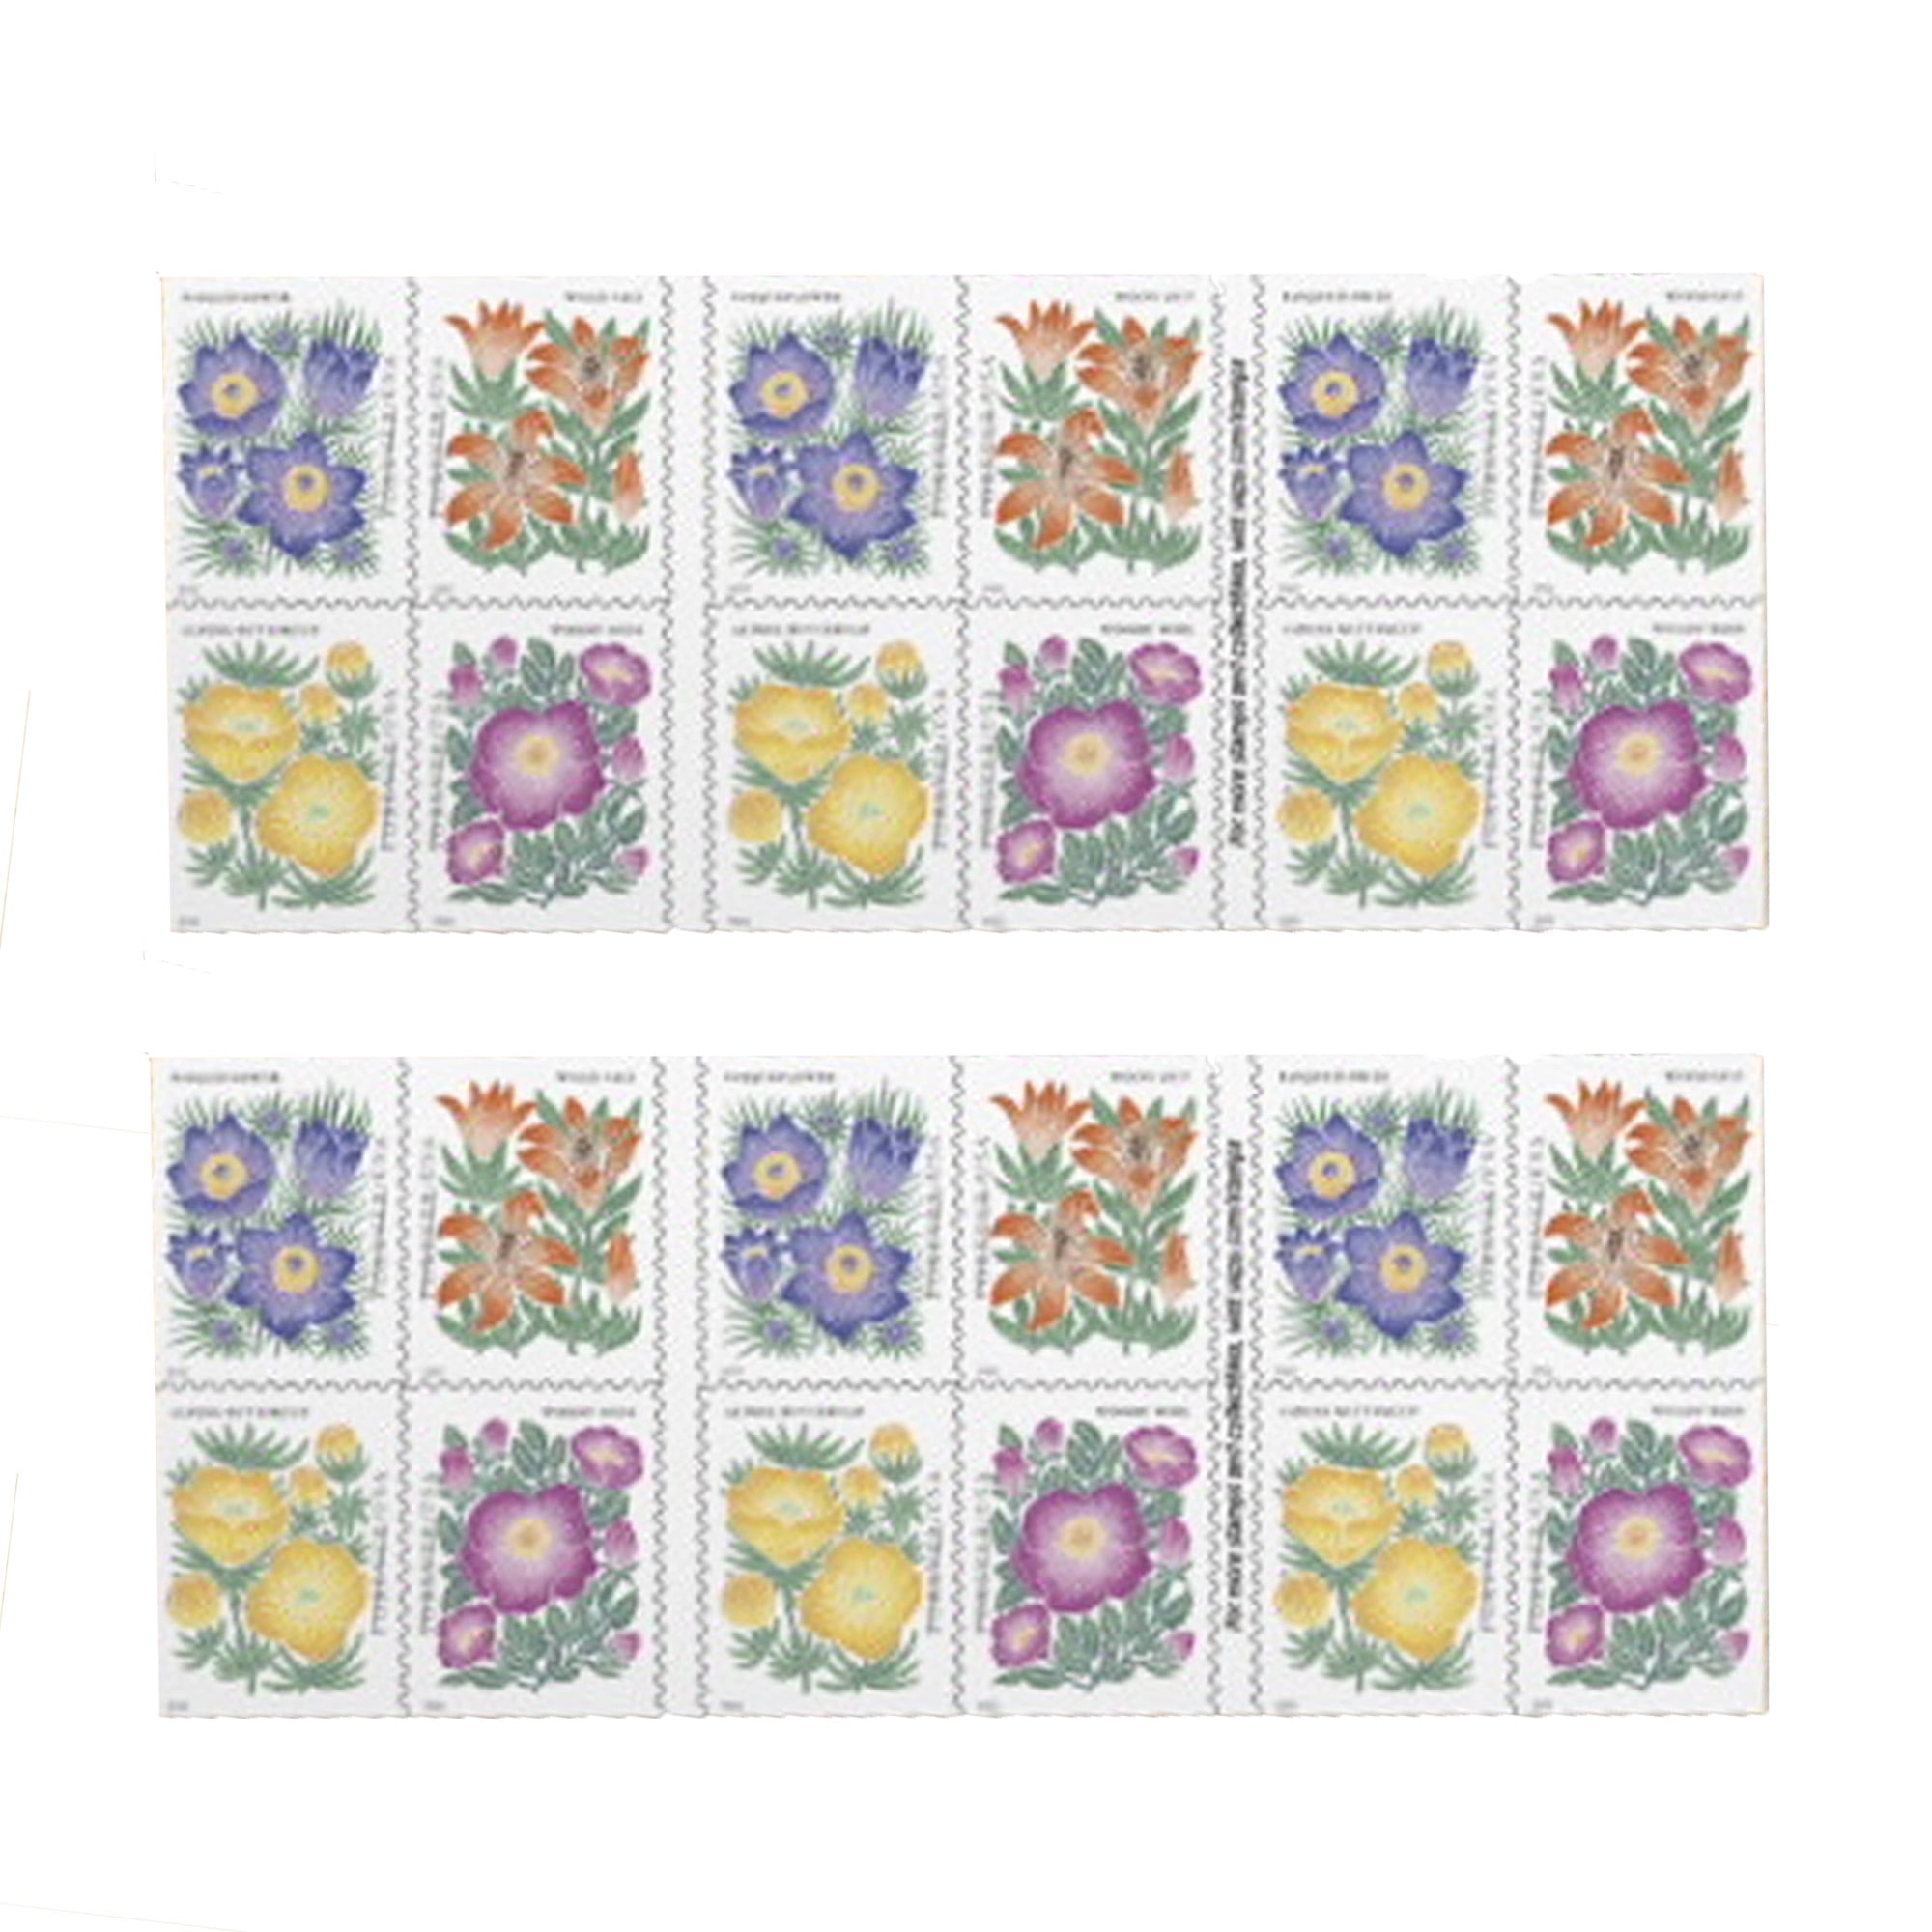 USPS Love 2022 Forever First Class Postage Stamps -- Valentine Wedding Celebration Anniversary Romance Party -- 1 Sheet 20 Stamps 